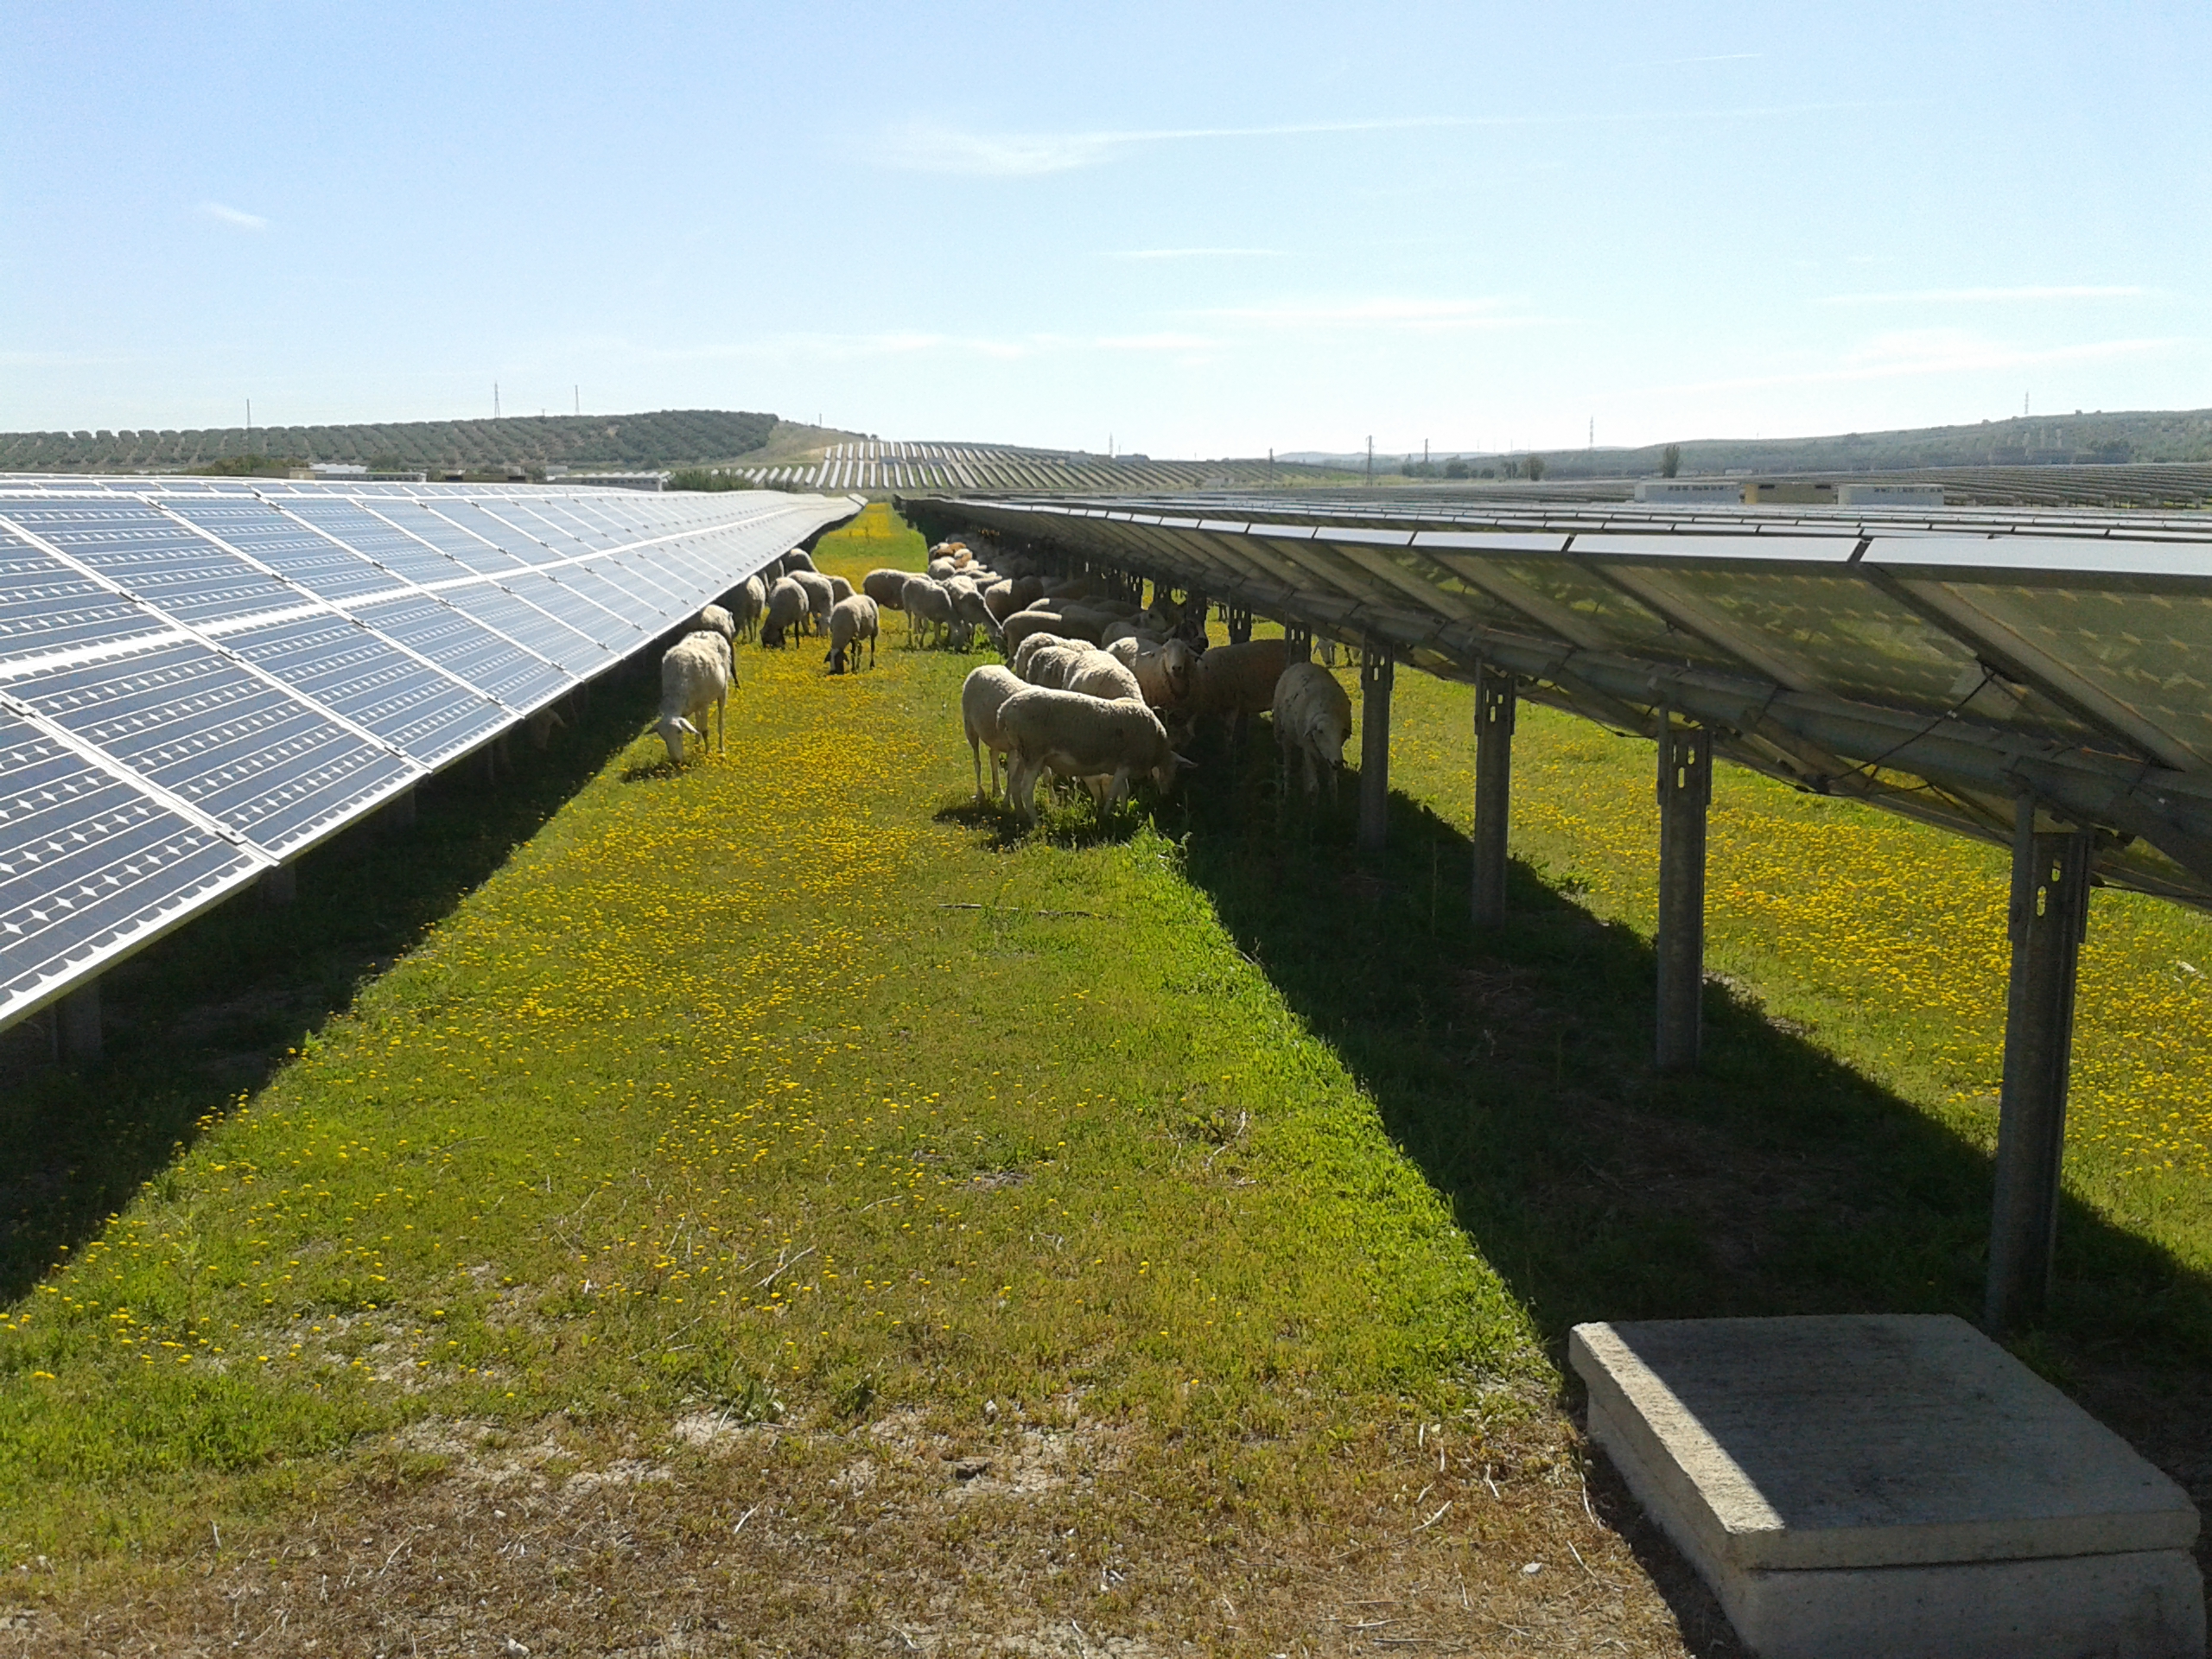 Grazing on the grounds of the solar photovoltaic plant facilities located in Espejo controls the growth of herbaceous vegetation and reduces the risk of fires